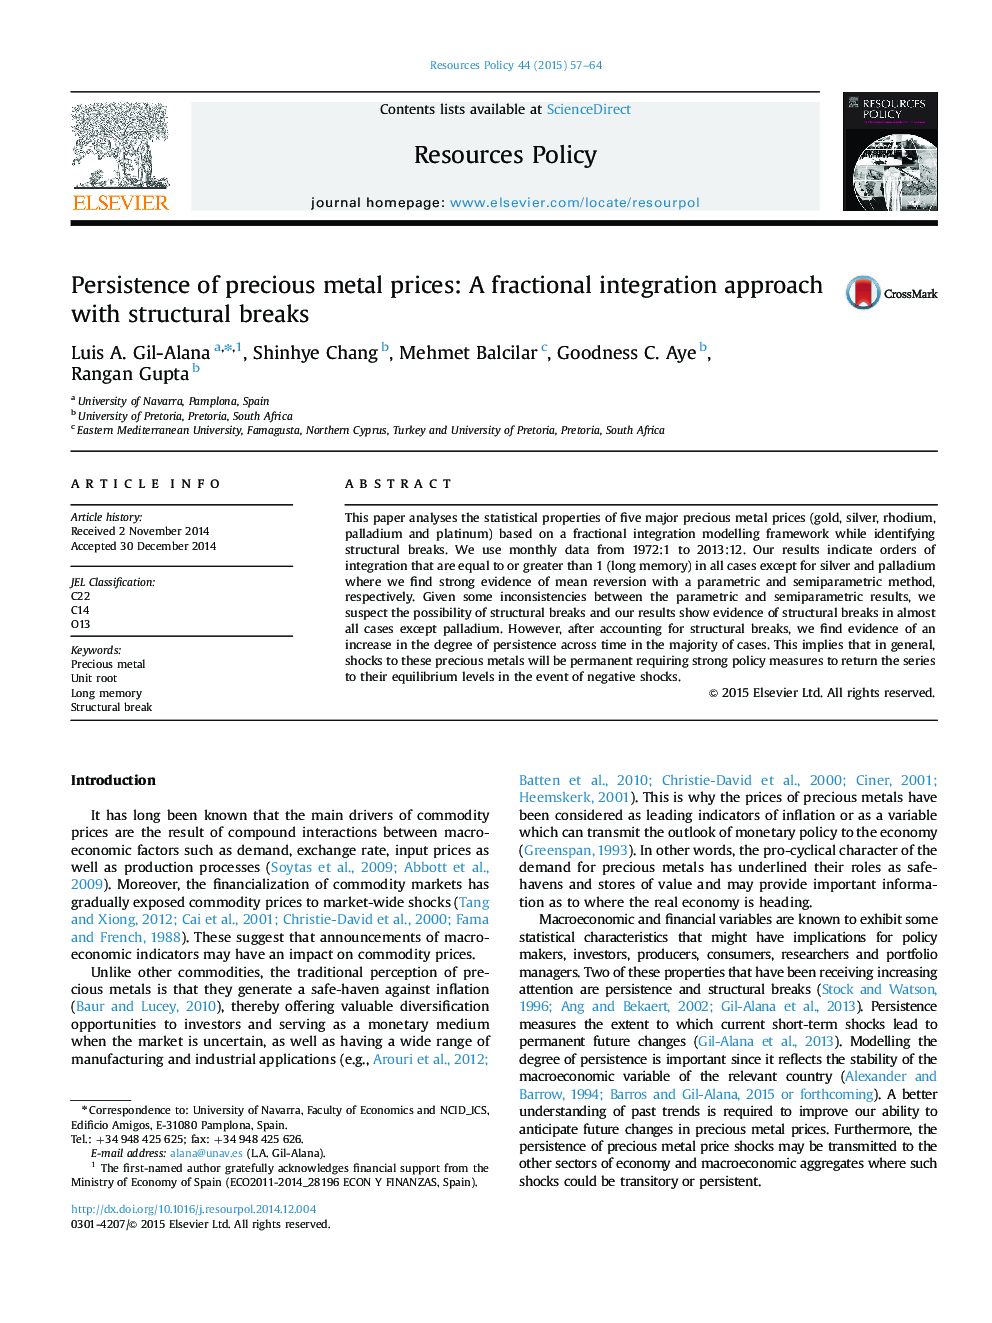 Persistence of precious metal prices: A fractional integration approach with structural breaks